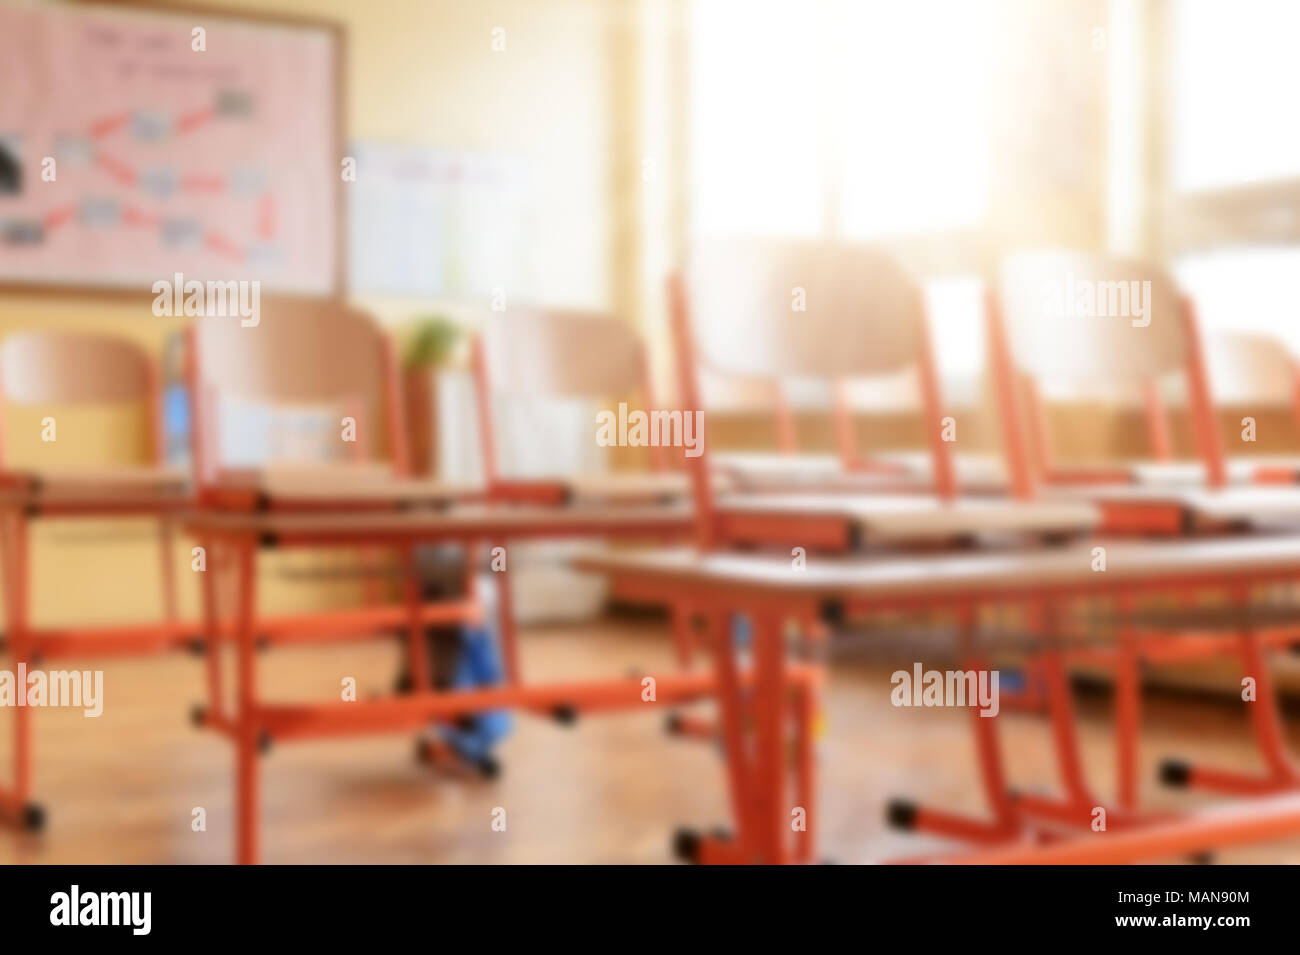 Blurred image of empty classroom with school desks, chairs and blackboard. Education concept. Stock Photo